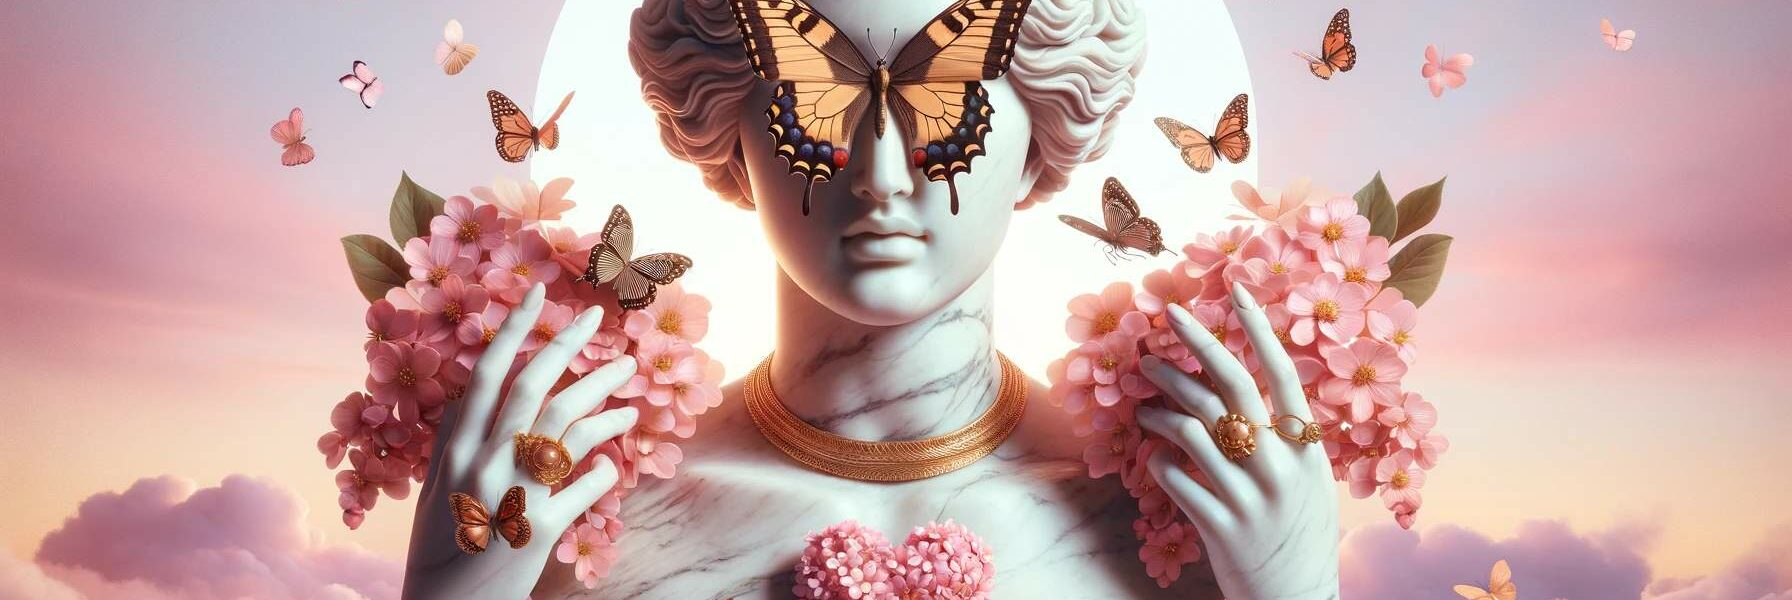 A Photo Of A Classical Marble Bust With Butterflies Covering Its Eyes, Symbolizing The 2024 Jewelry Trends. The Bust Is Adorned With A Gold Necklace And Is Framed By Two Delicate Hands Wearing Gold Rings, One Cradling A Heart-Shaped Cluster Of Pink Flowers.